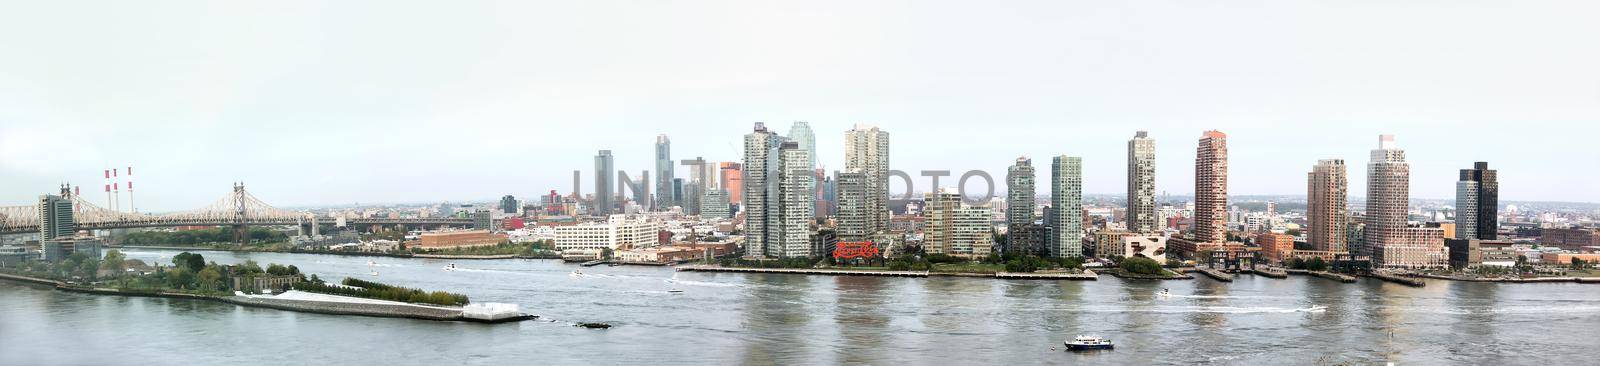 Panoramic views of East River from United Nations Building. Ed Koch Queensboro Bridge, Franklin D Roosevelt Four Freedoms Park, Hunters Point and Long Island City YMCA